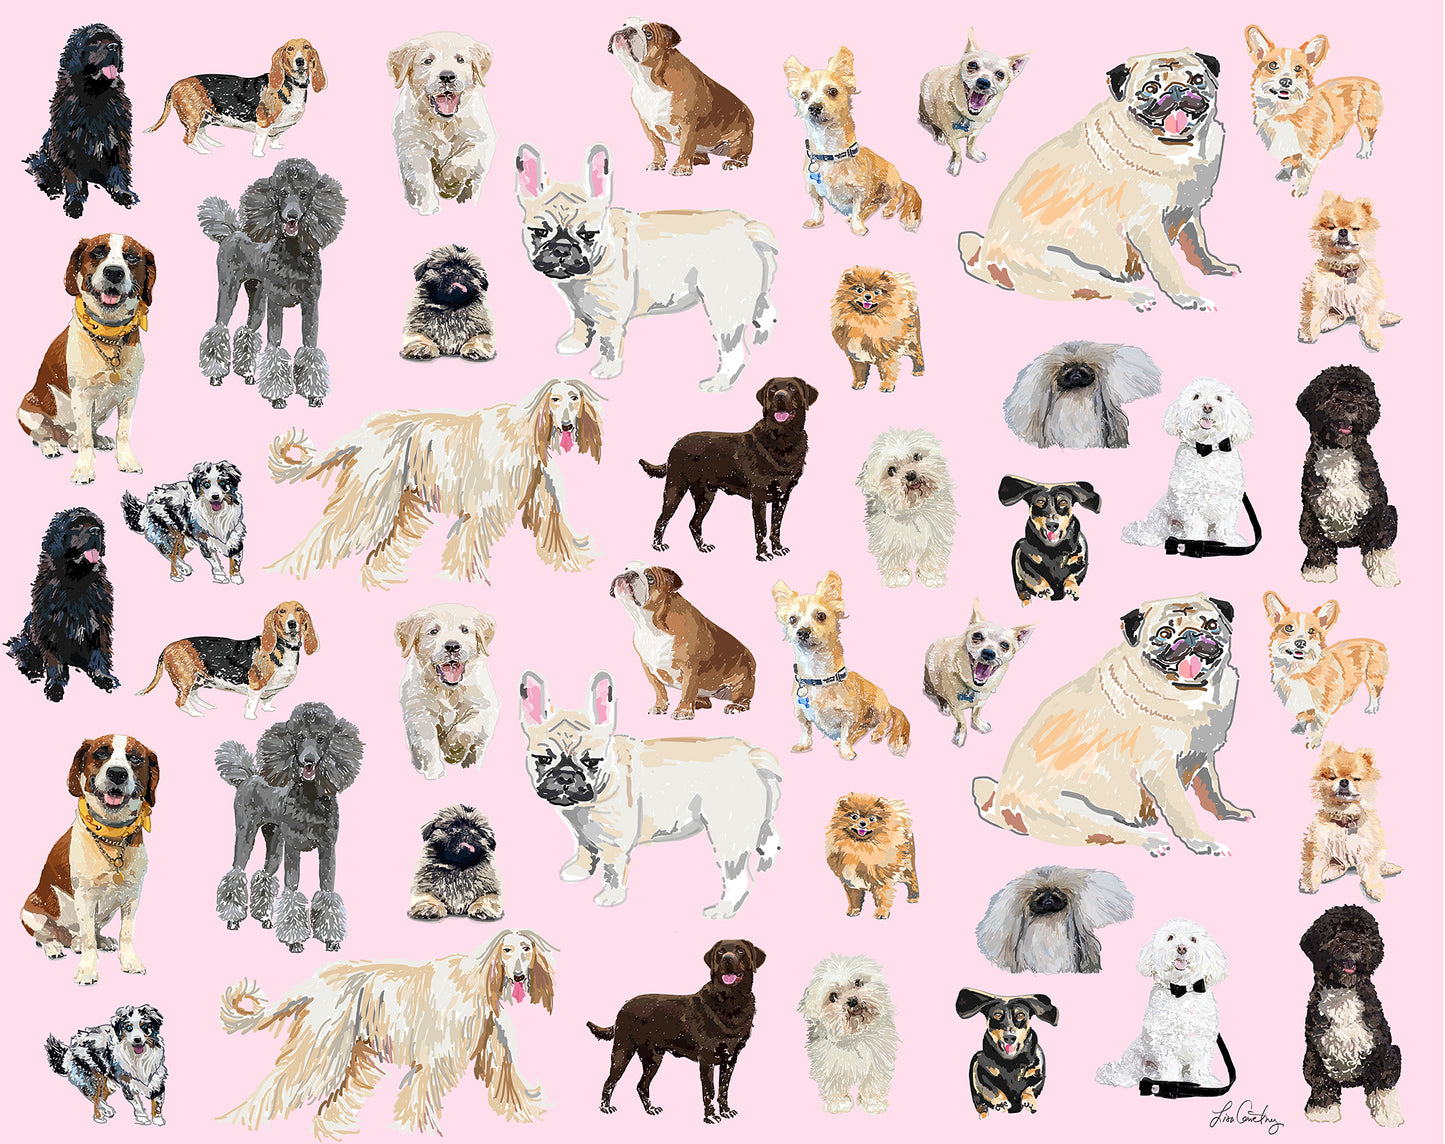 An image of the Lisa Courtney Designs Designer Dog Scarf. Light pink rectangular scarf with hand painted white, black, golden and brown dogs of all different breeds.